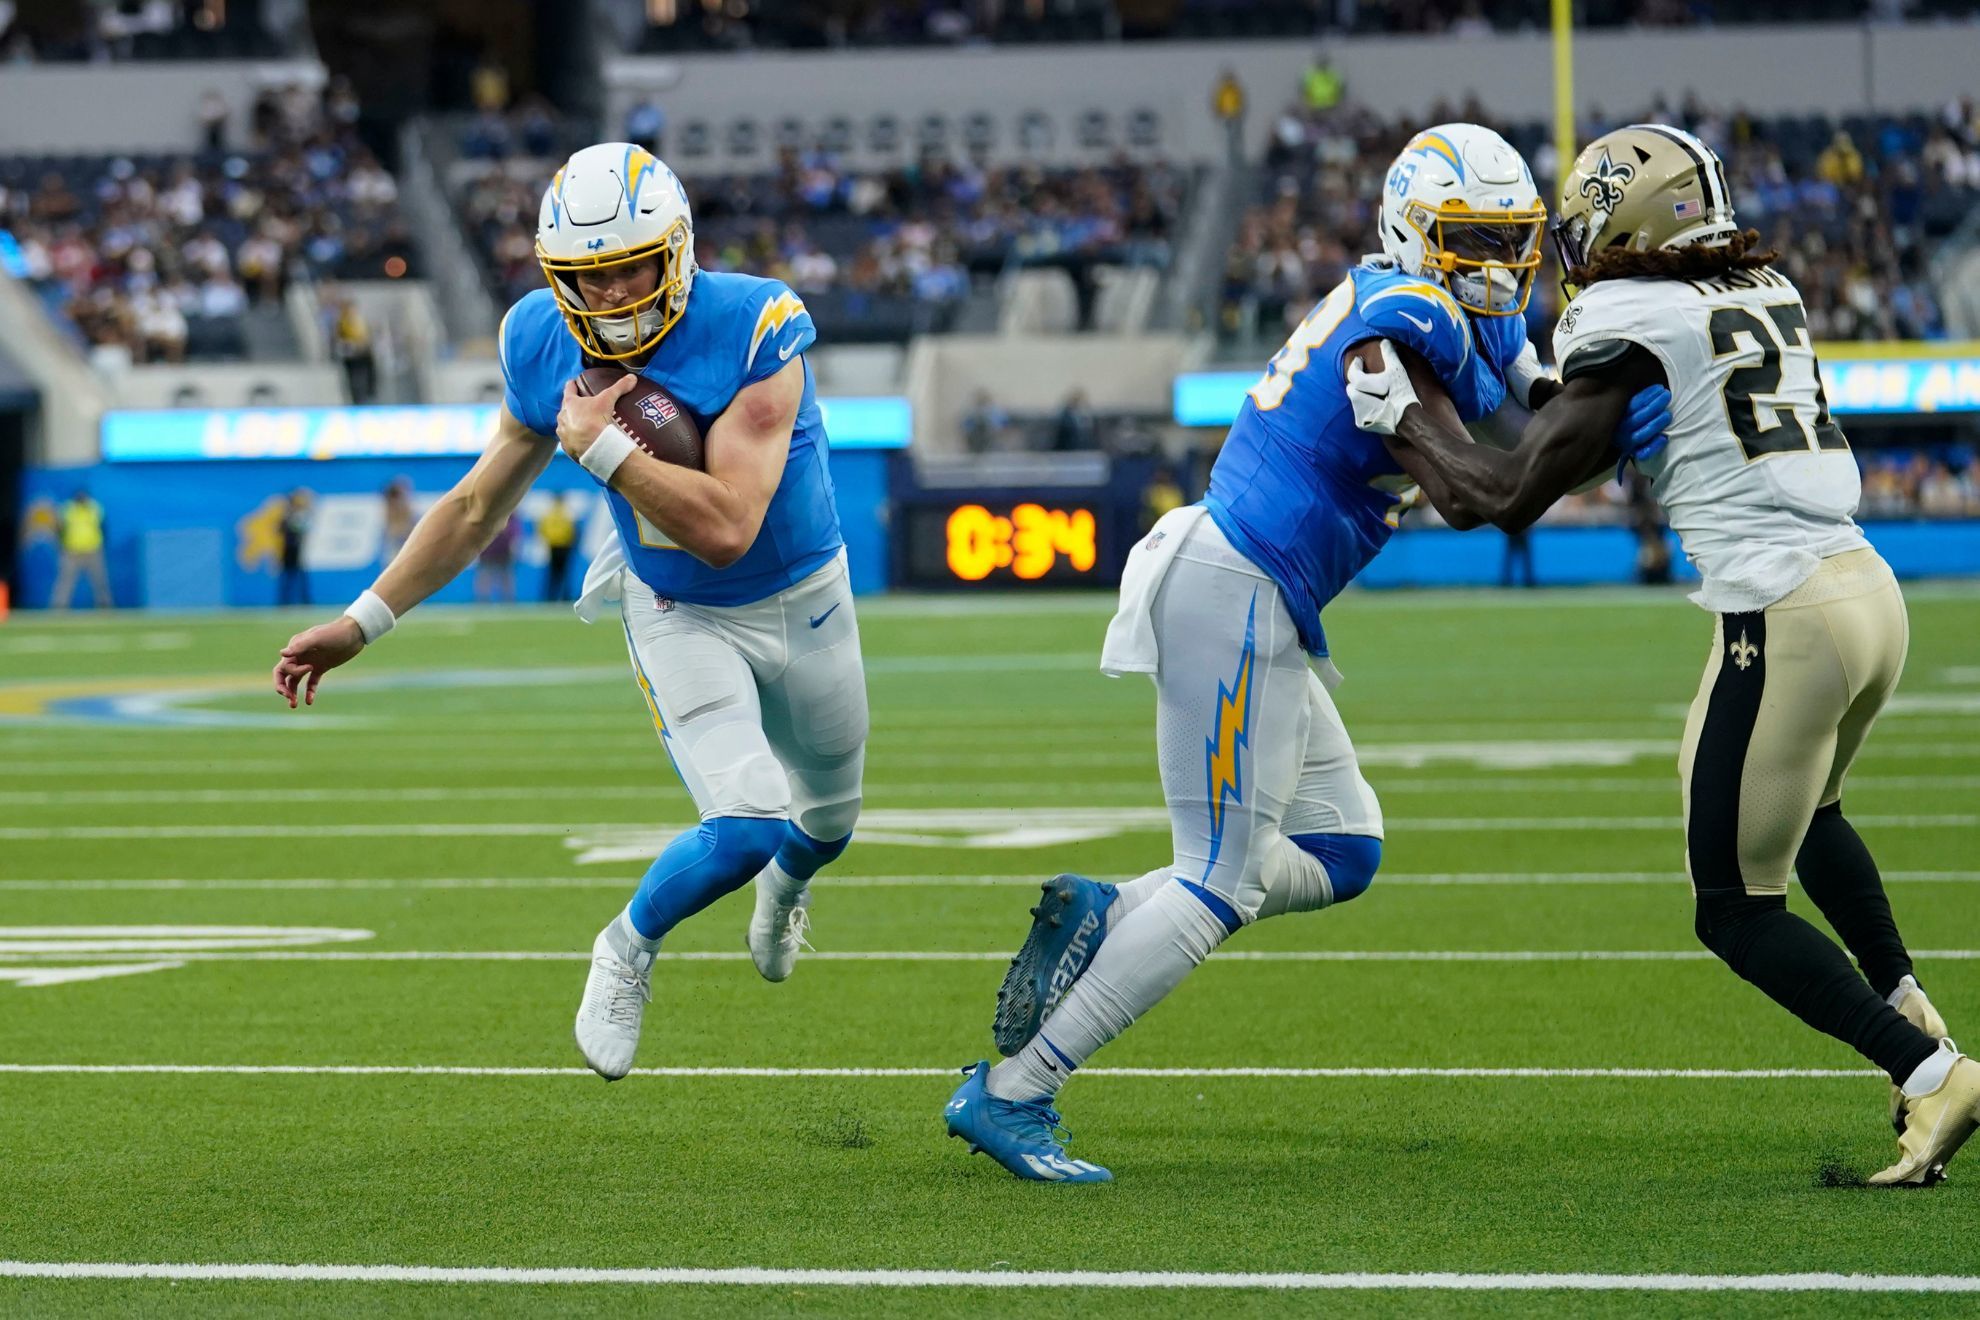 Chargers QB2 Easton Stick is a roller coaster in NFL preseason loss to Saints